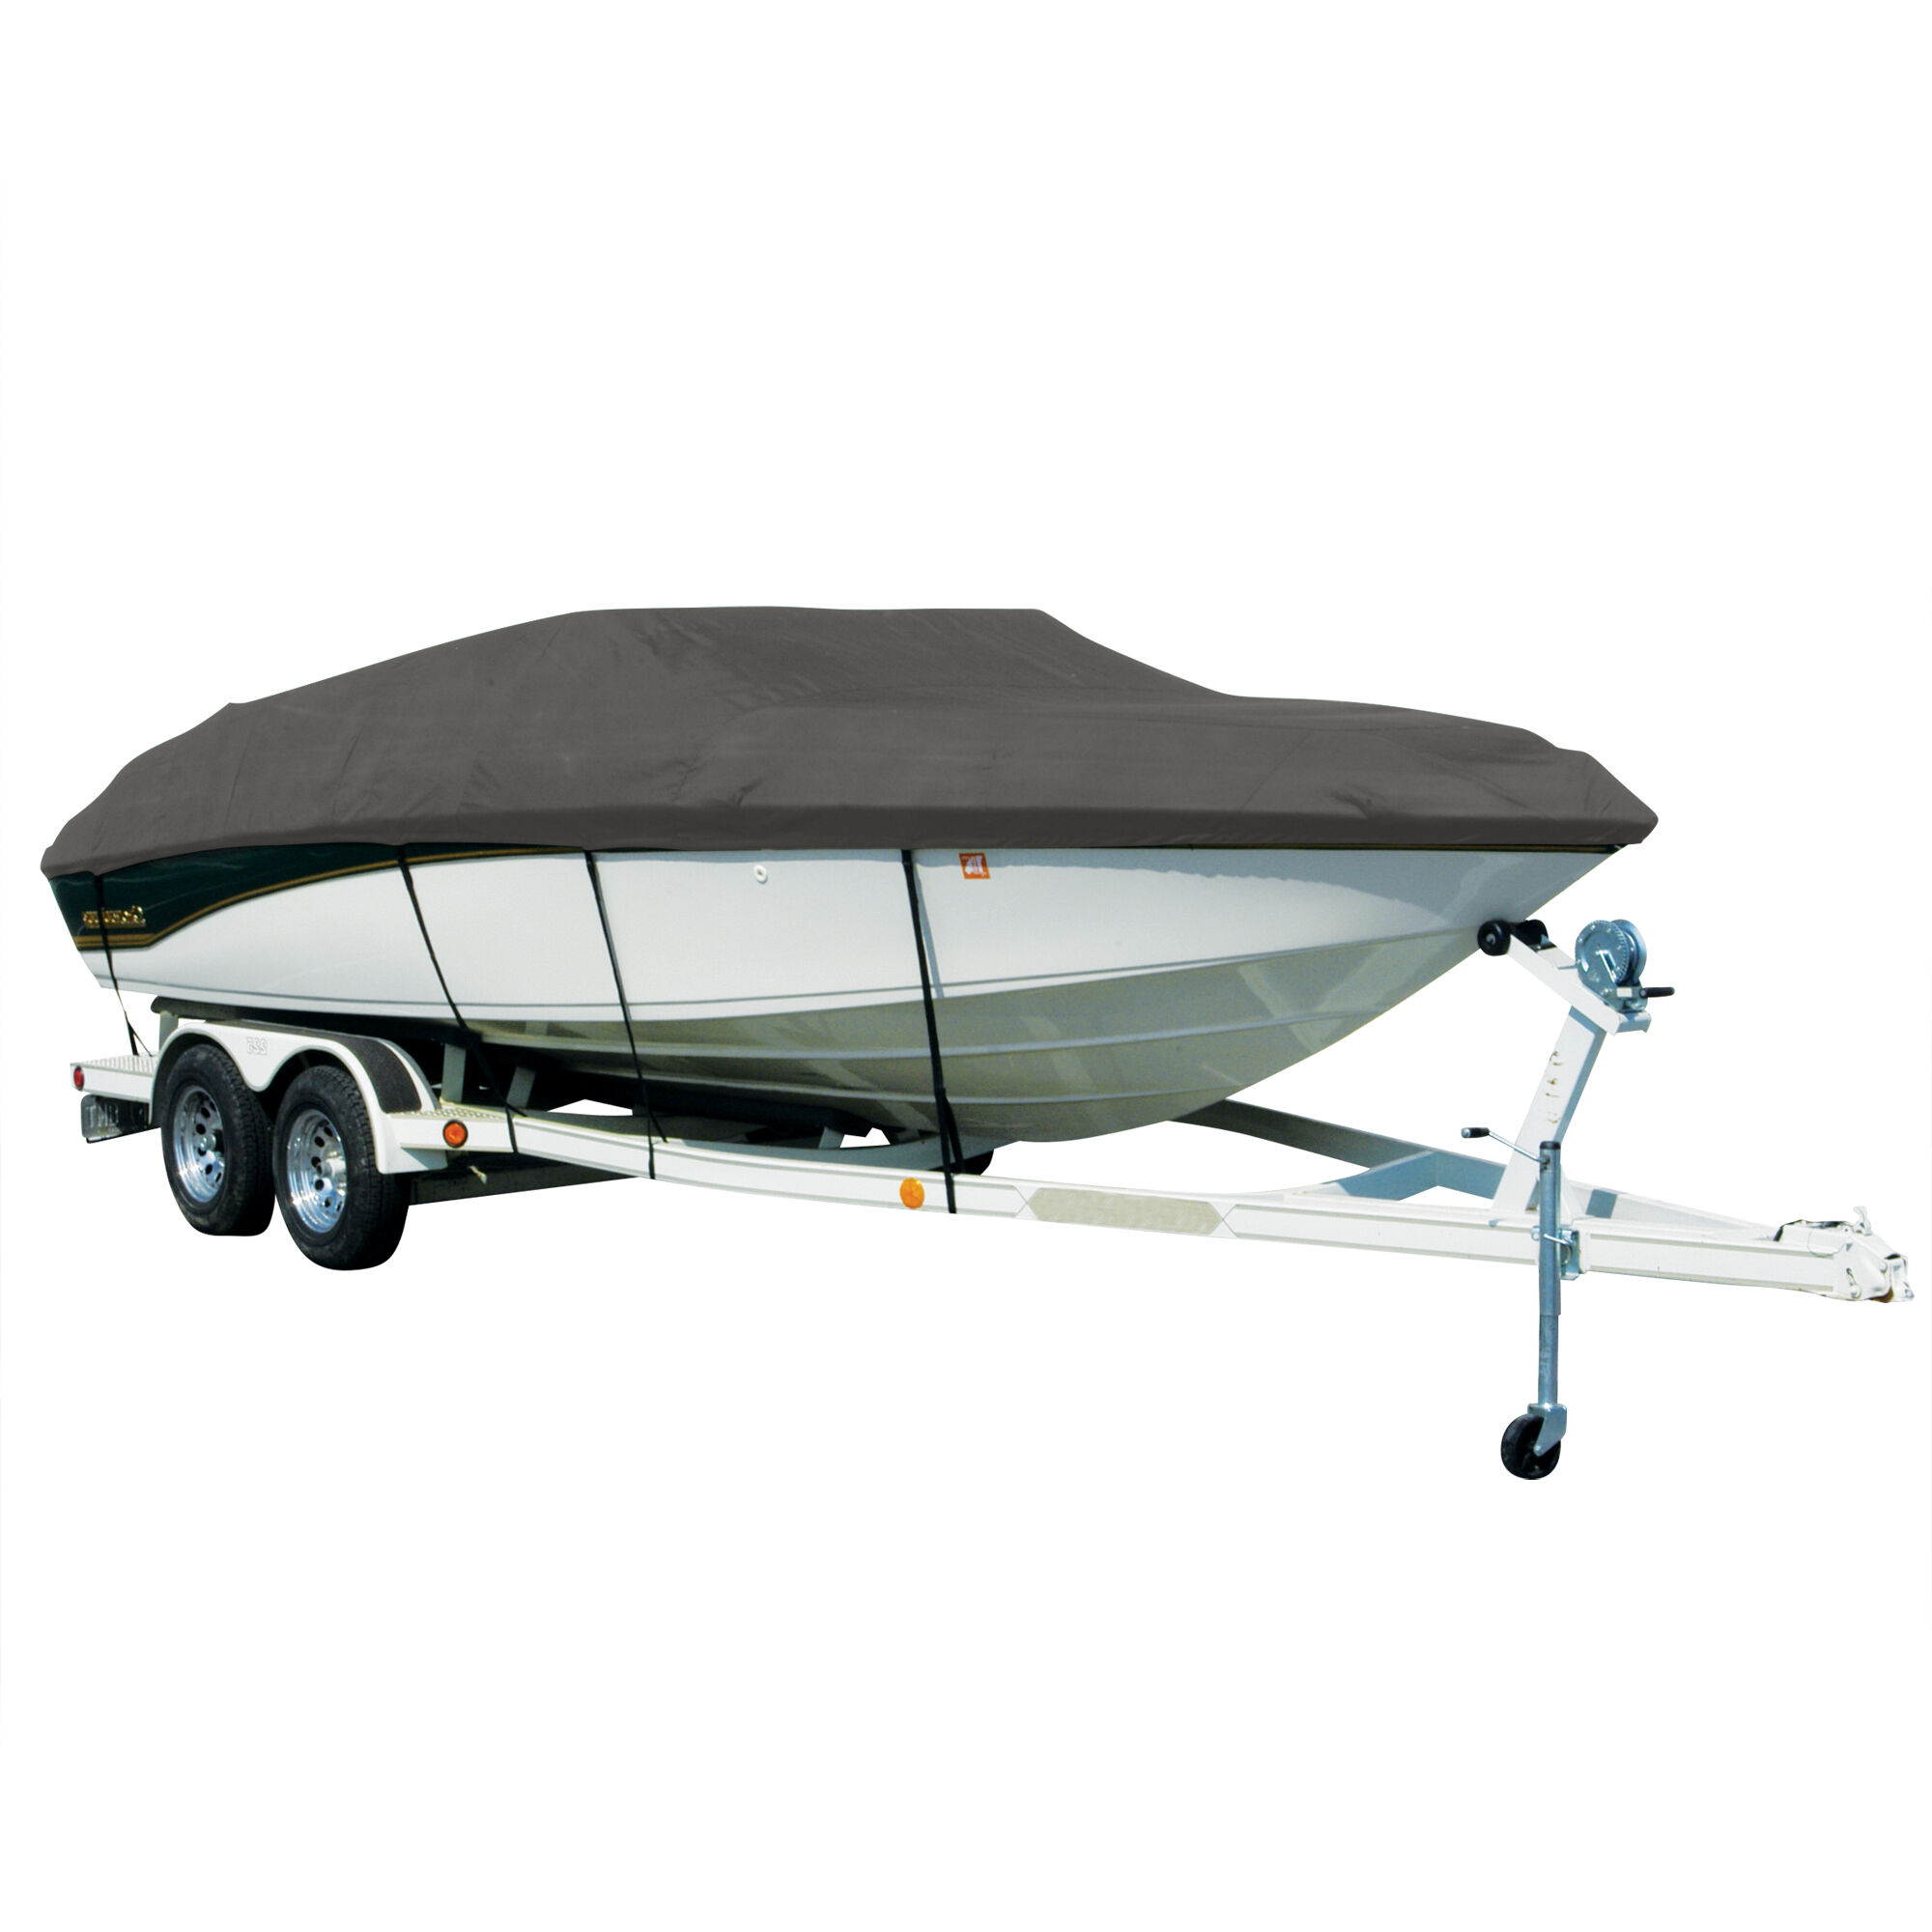 Covermate Exact Fit Sharkskin Boat Cover For Alumacraft 185 Pro Sc Jet Drive w/ Trolling Motor O/B in Charcoal